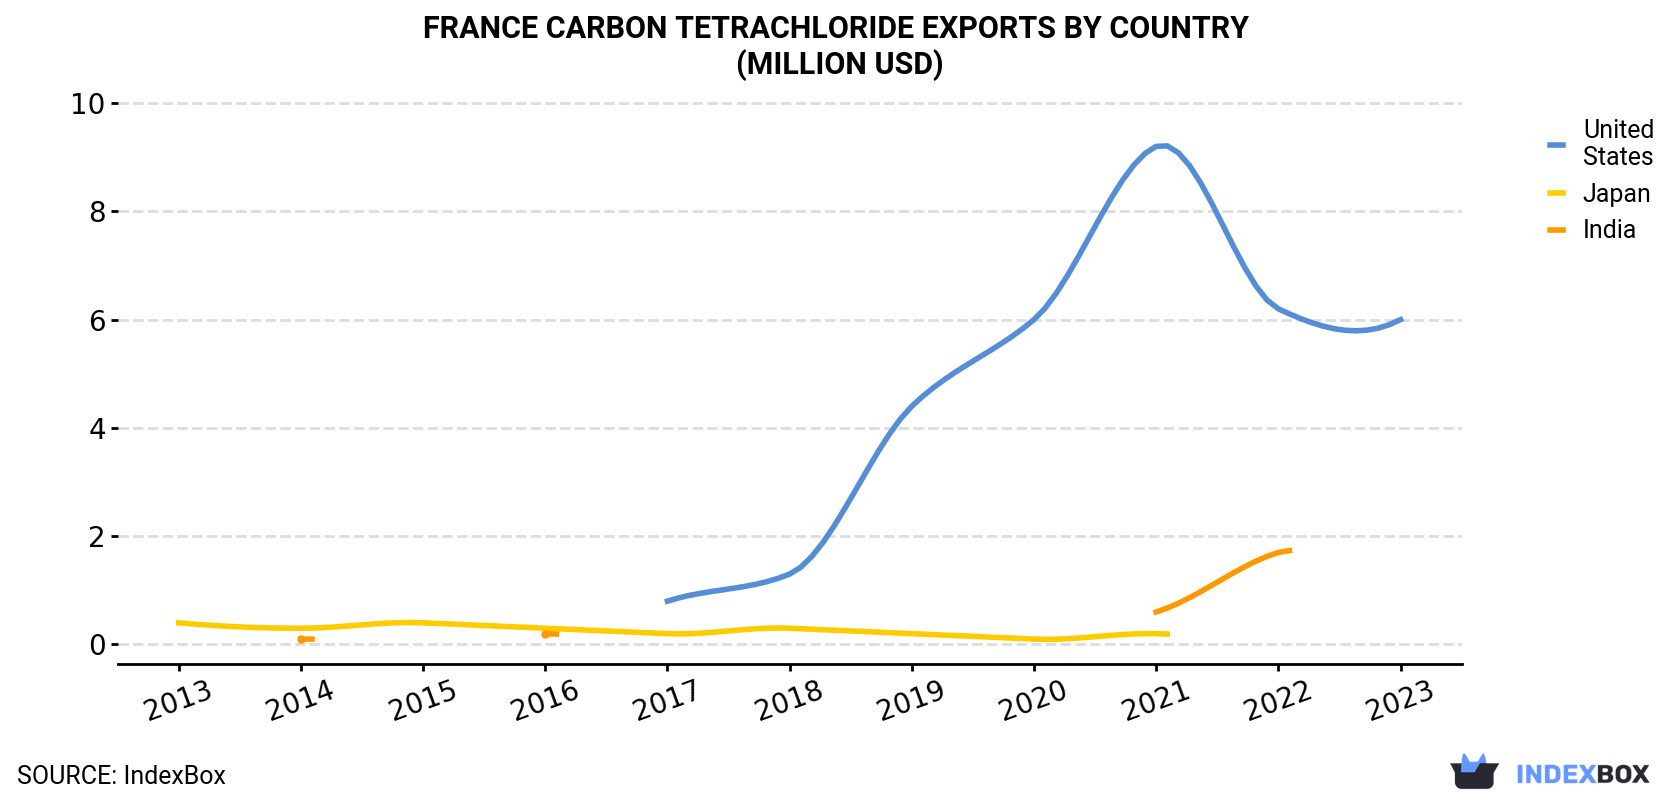 France Carbon Tetrachloride Exports By Country (Million USD)